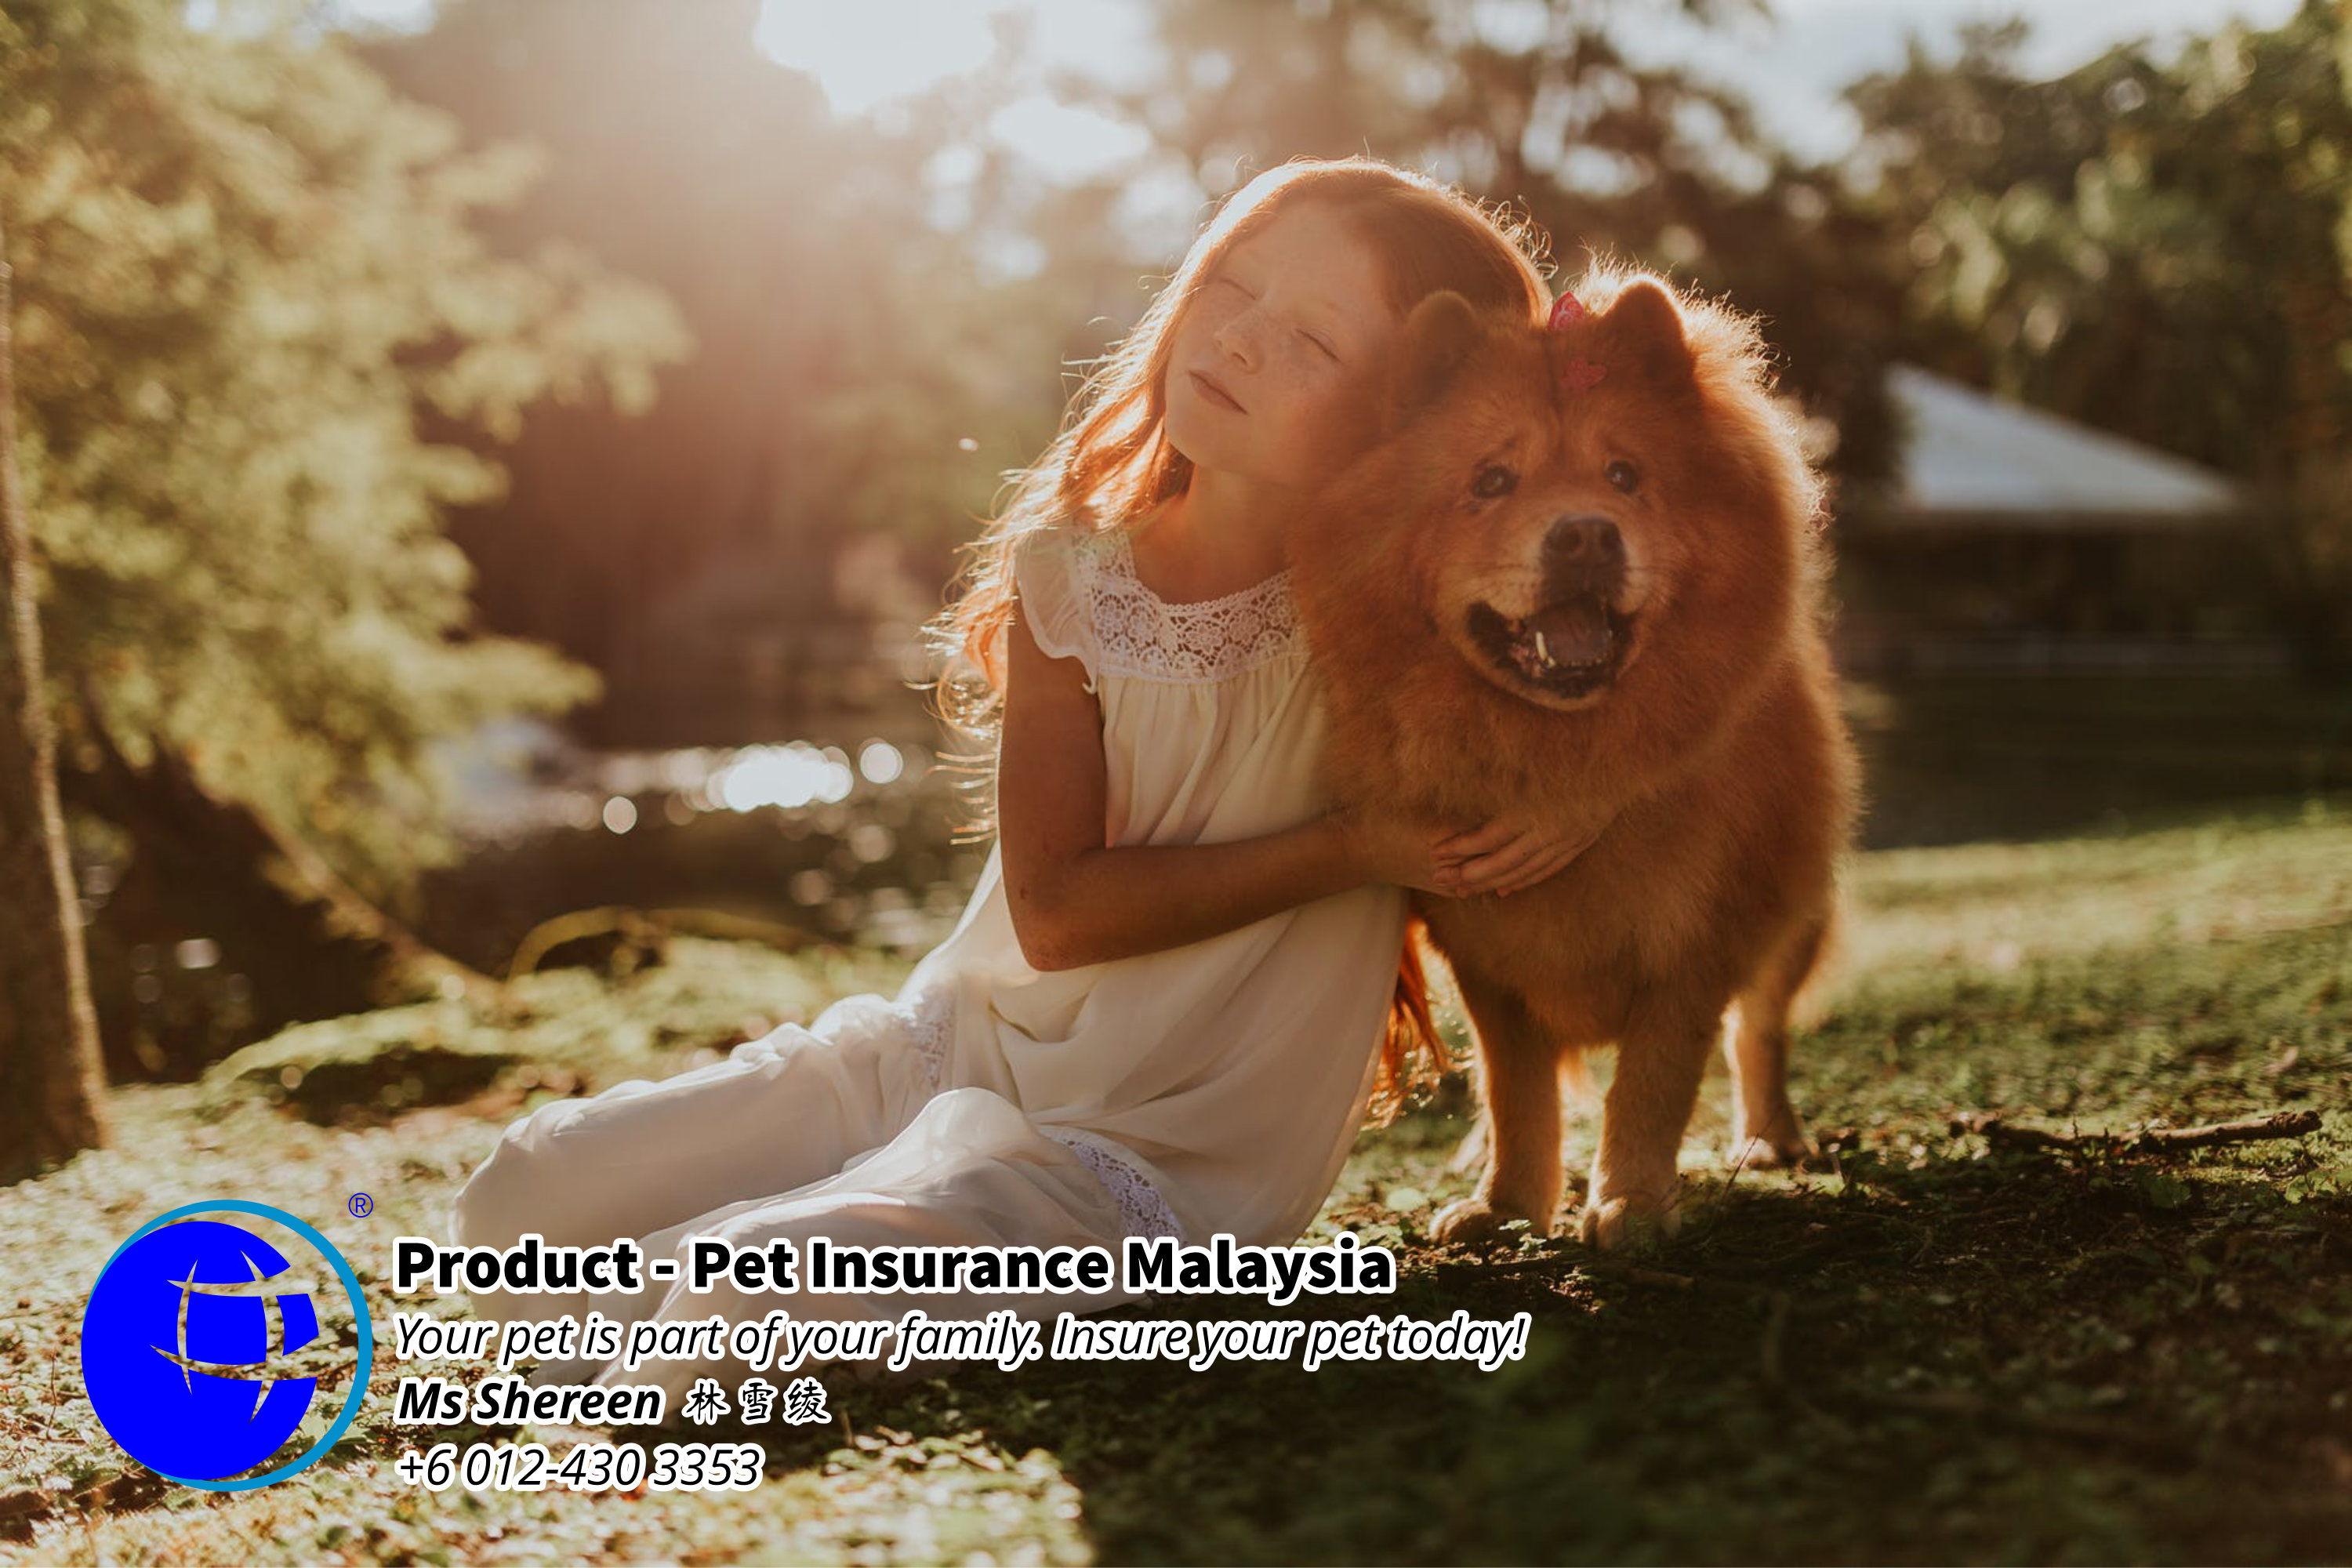 Pet Insurance Malaysia Johor Batu Pahat Agensi Pekerjaan Unilink Prospects SB Wisma V Cat Insurance Malaysia Dog Insurance Malaysia Johor Batu Pahat Your pet is part of your family Insure your pet today A12